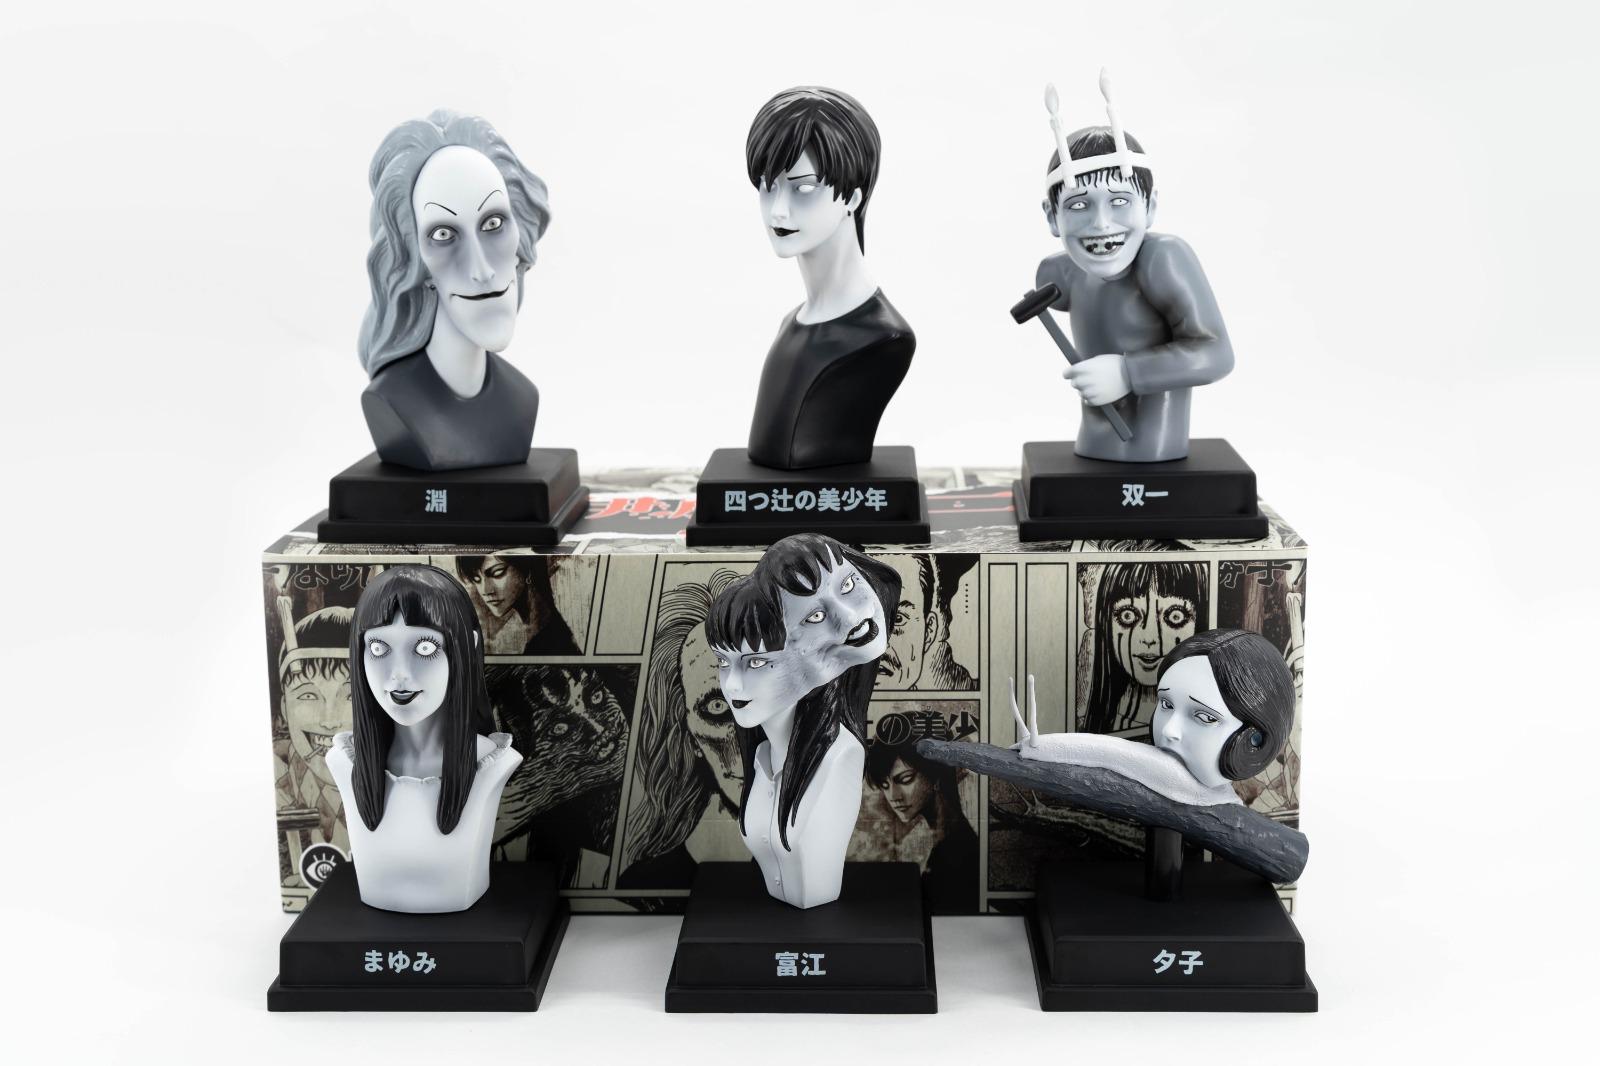 Statues of women and mannequins from Junji Ito's Kaikibako blind box series.